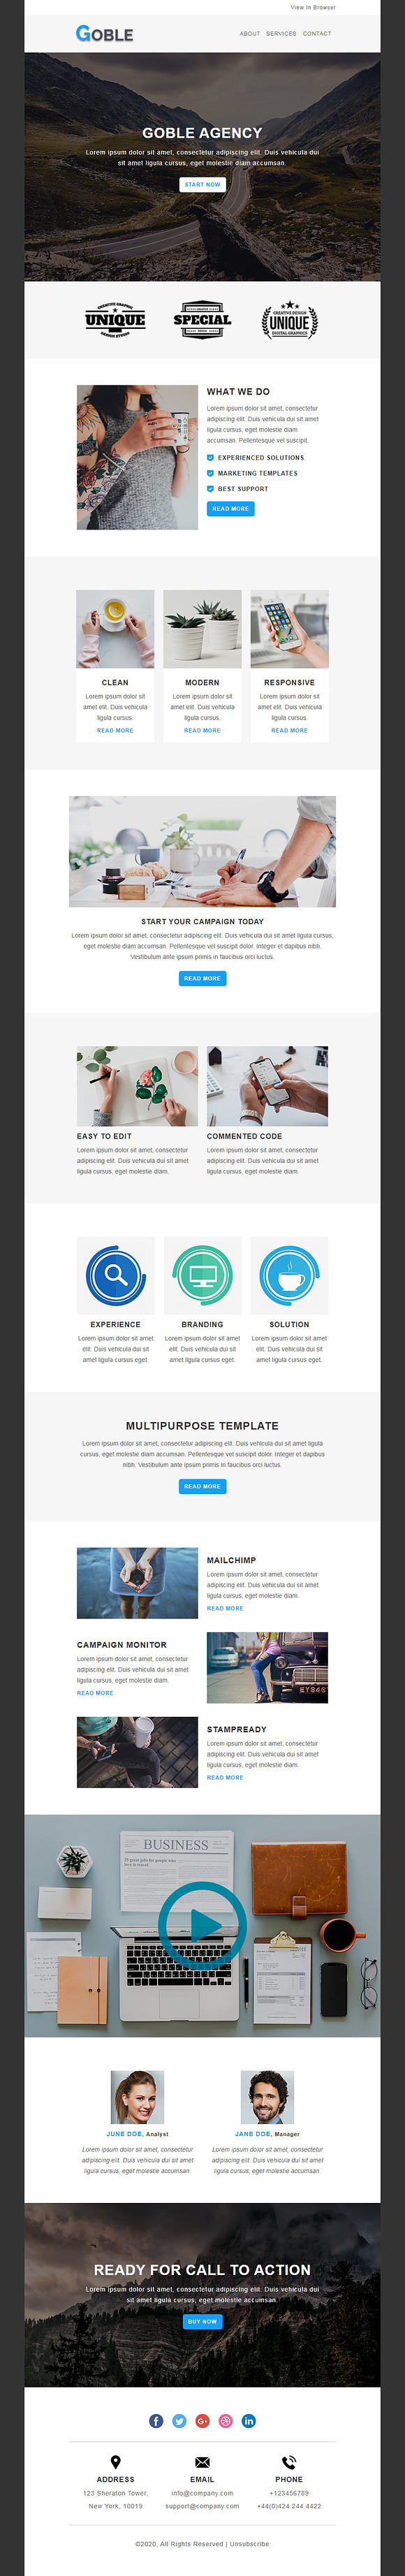 PREMIUM EMAIL BUNDLE #2 in Mailchimp Templates - product preview 3